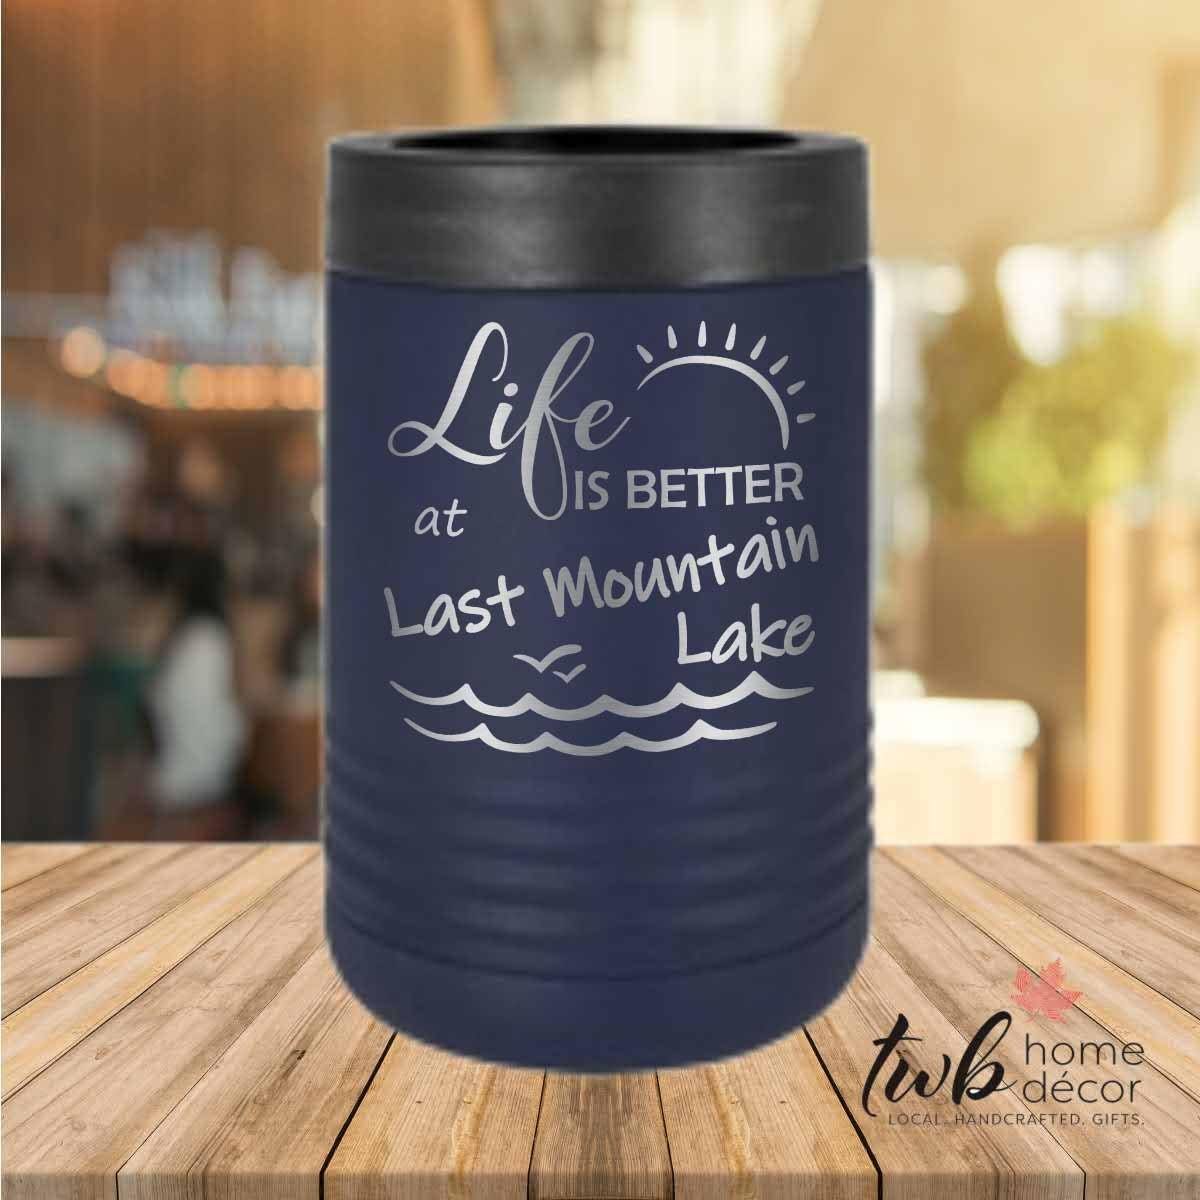 Life is Better at Last Mountain Lake Thermal - TWB Home Decor